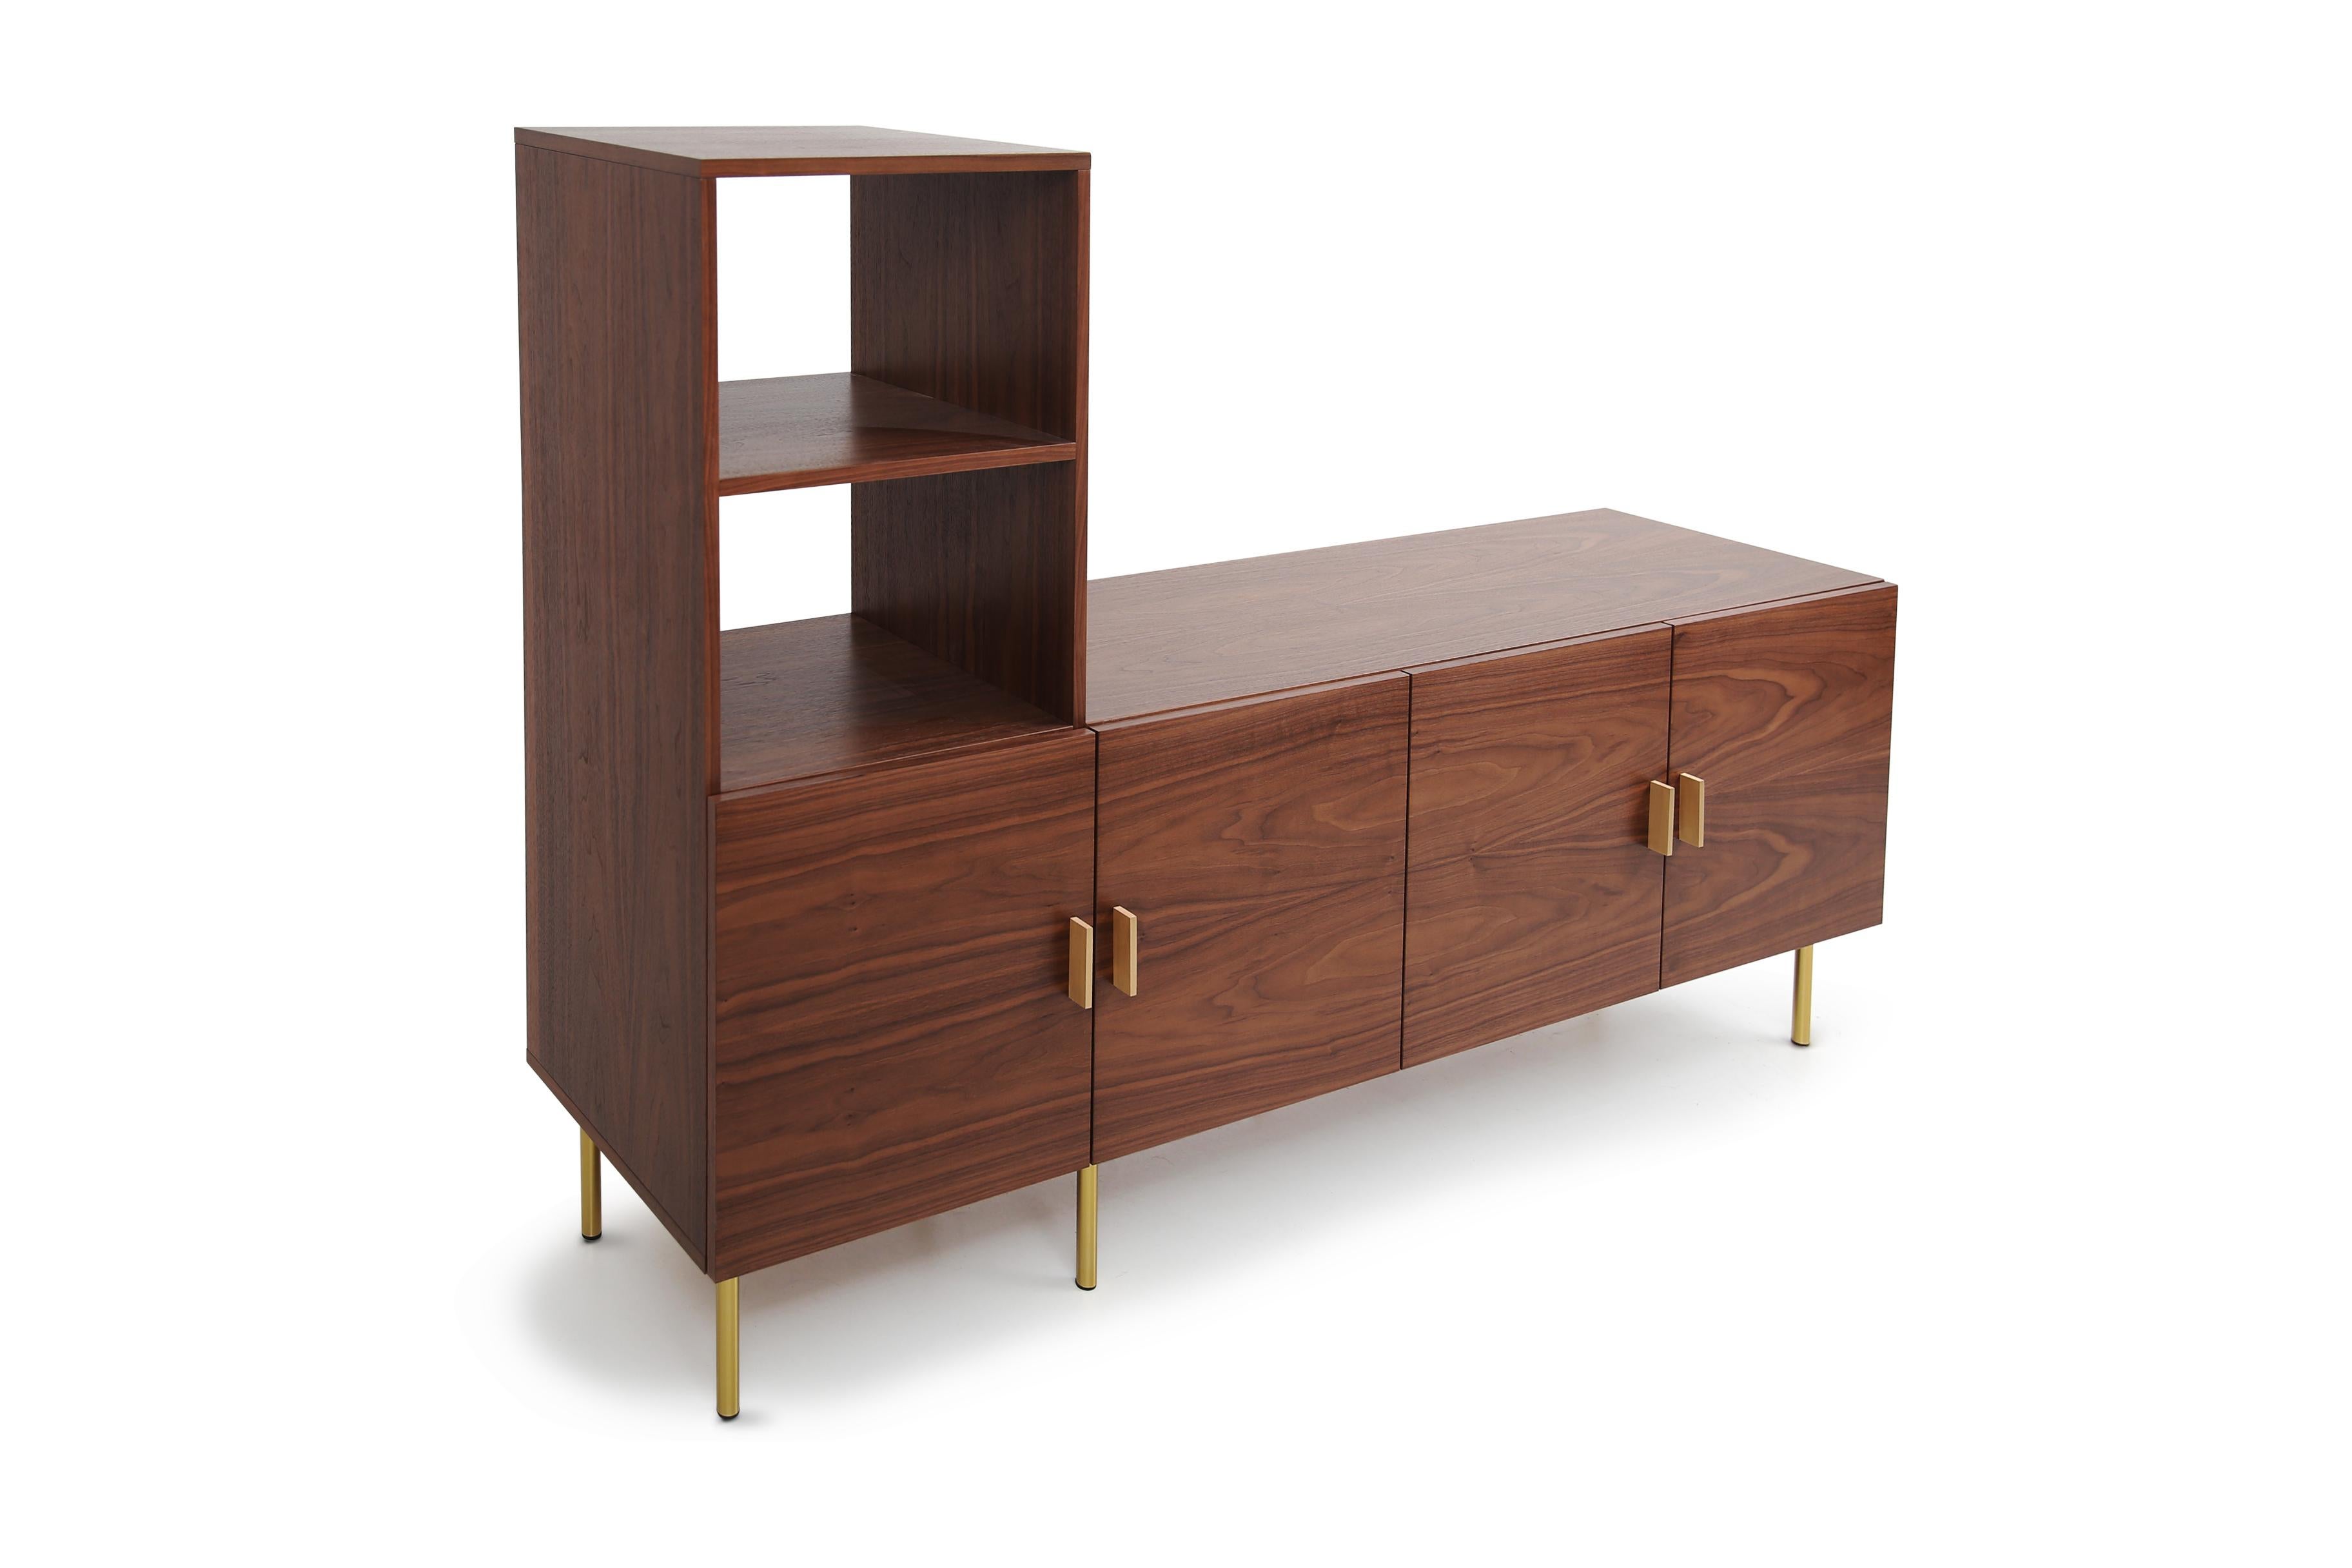 Introducing our stunning midcentury inspired Reykjavik cupboard, perfect for adding a touch of vintage elegance to your home. Crafted from the finest premium walnut veneers, this piece exudes luxury and sophistication.

The sleek and stylish